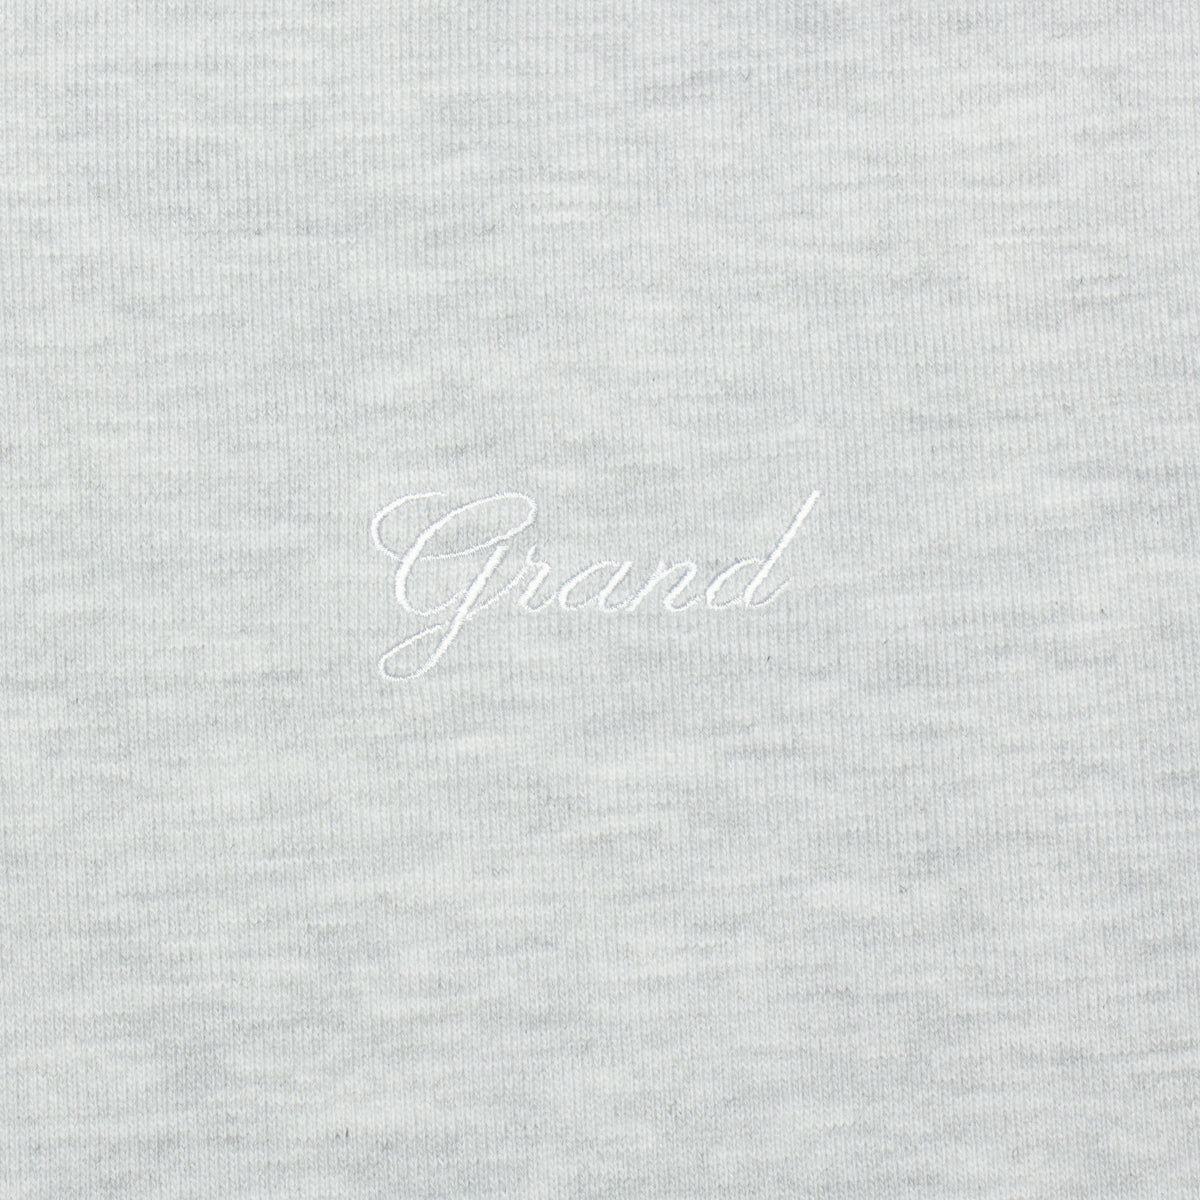 Grand Collection | Collared Sweatshirt Color : Ash / White